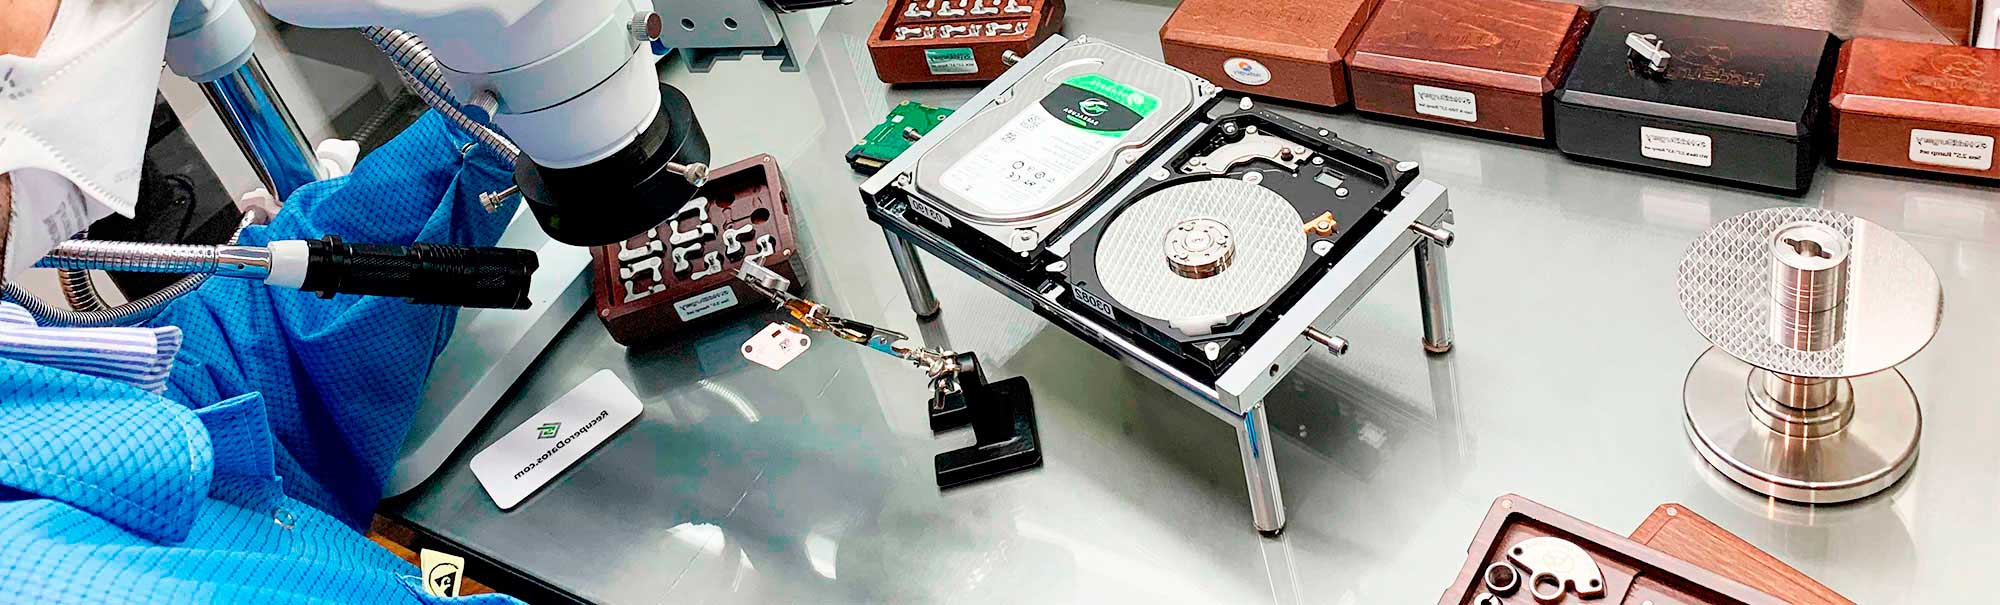 Data Recovery  HDD - Laboratory run by UTN Engineers in clean room